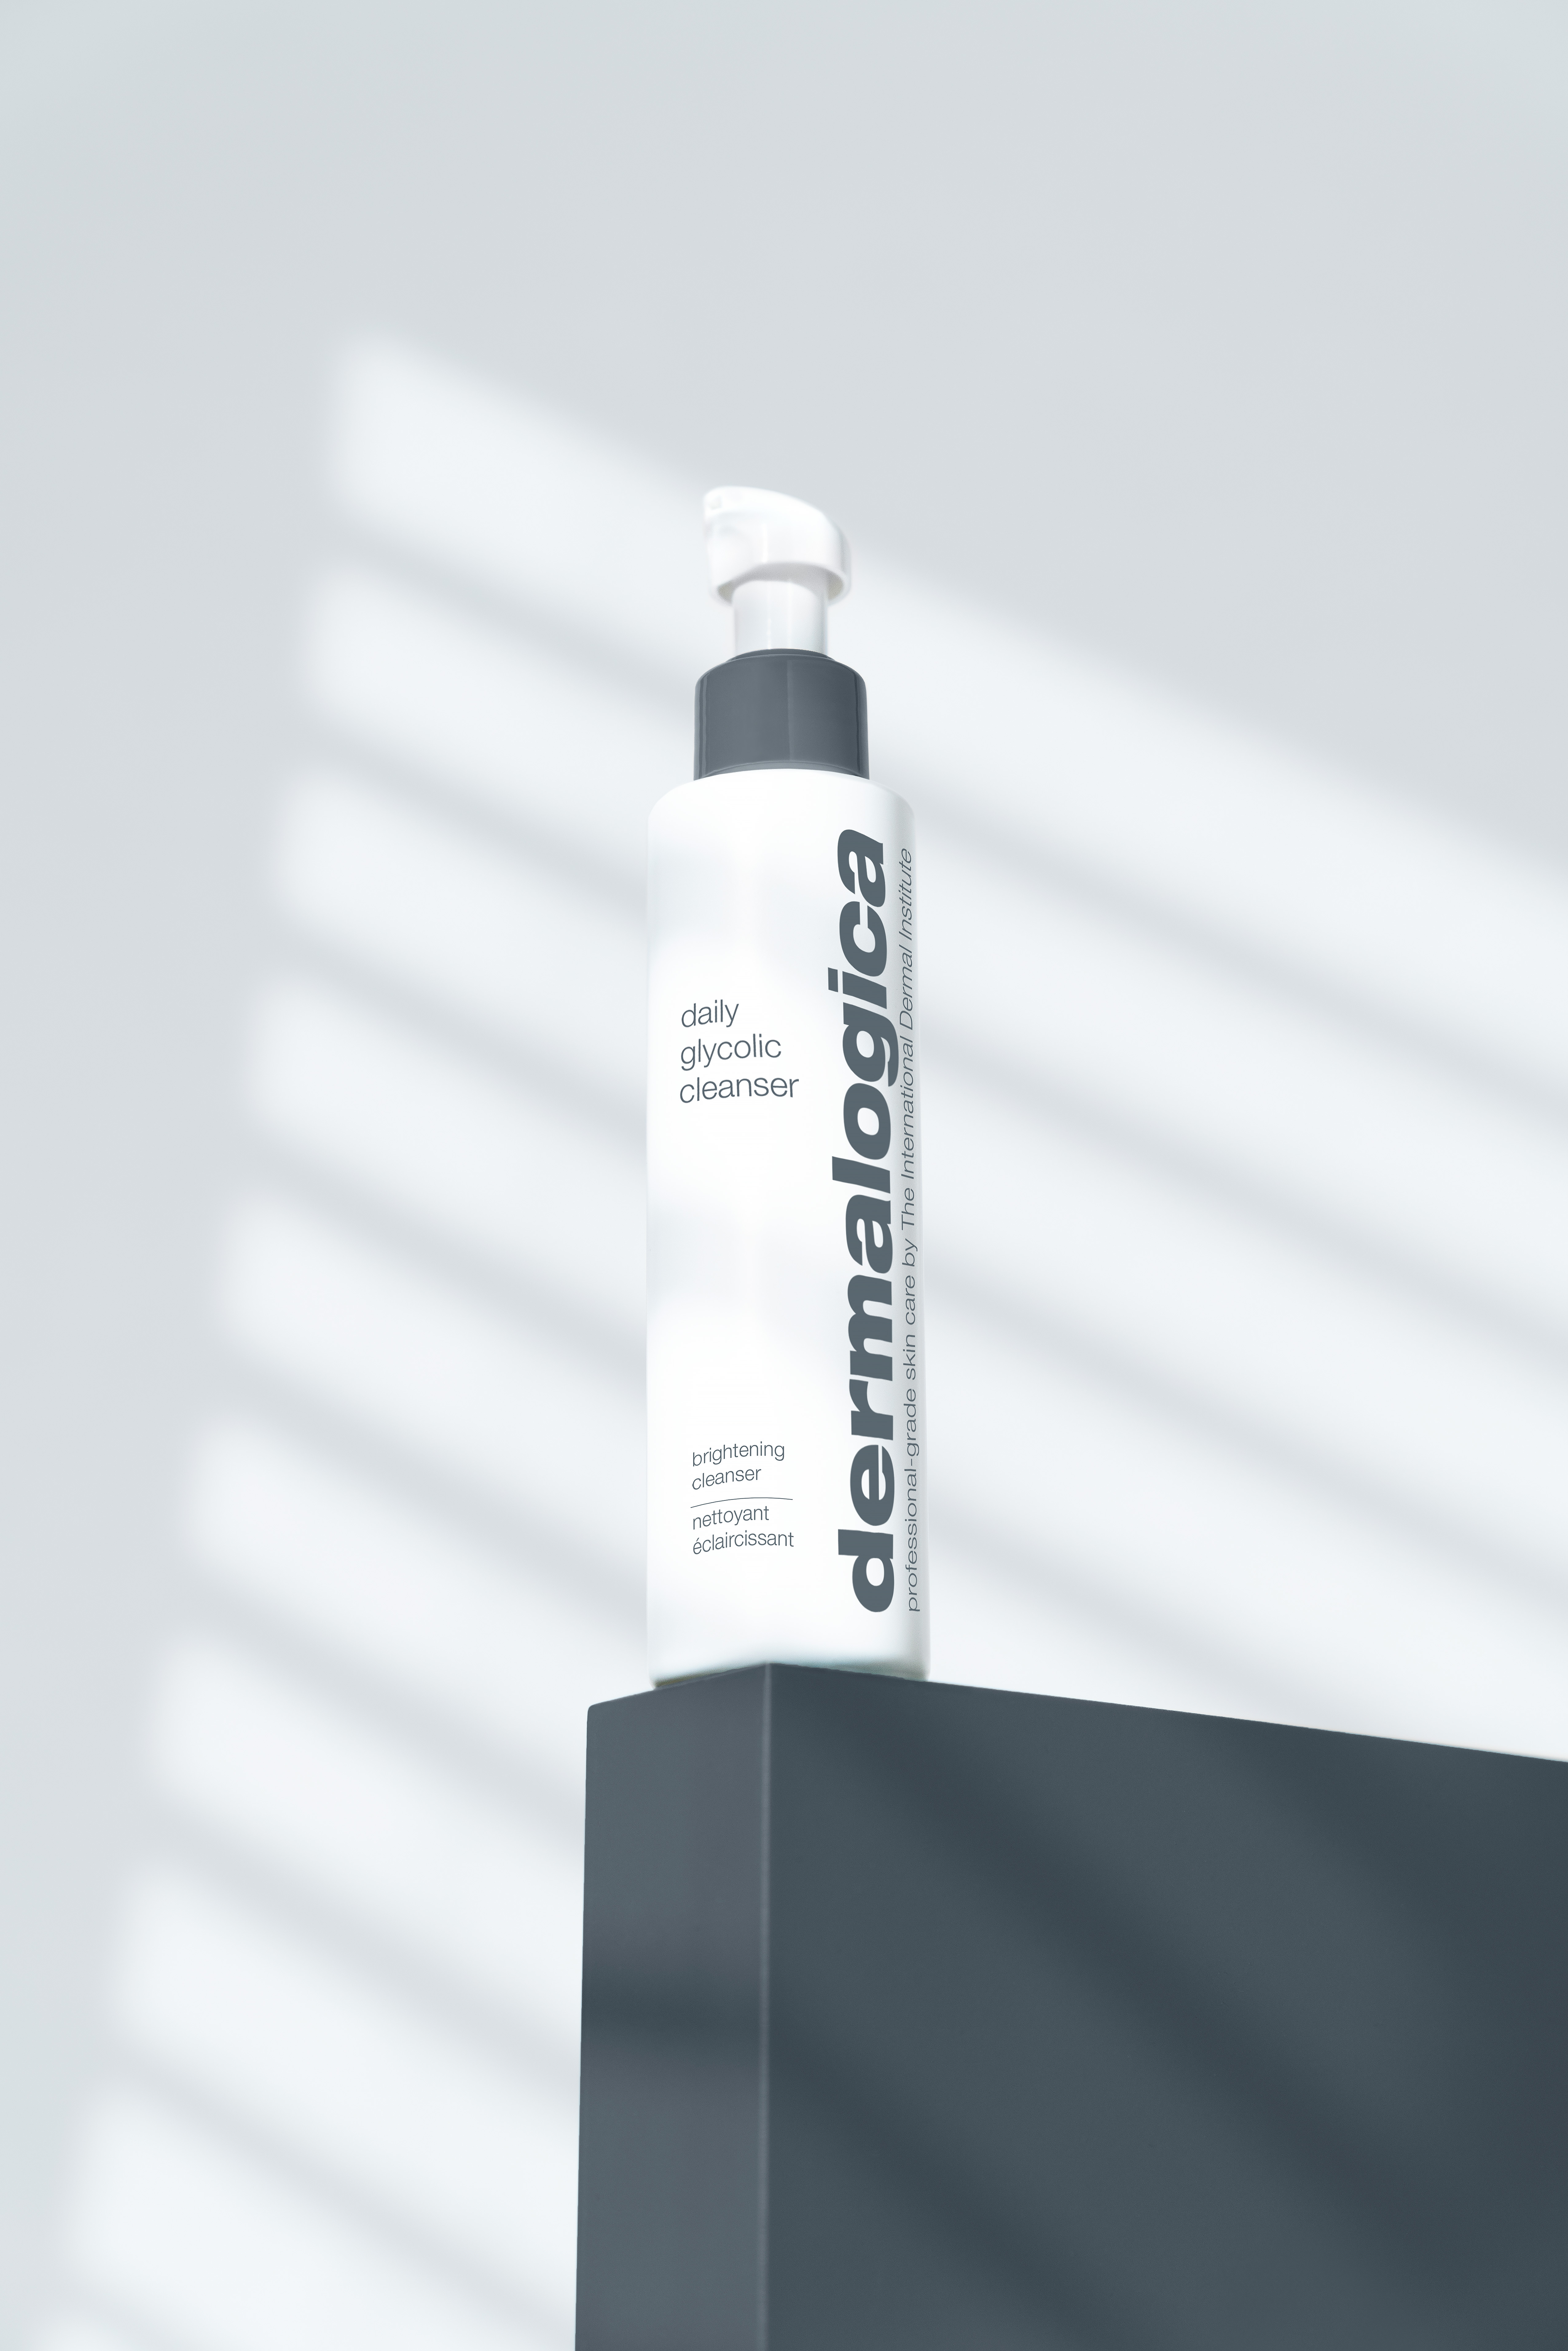 NEW by Dermalogica: Daily Glycolic Cleanser